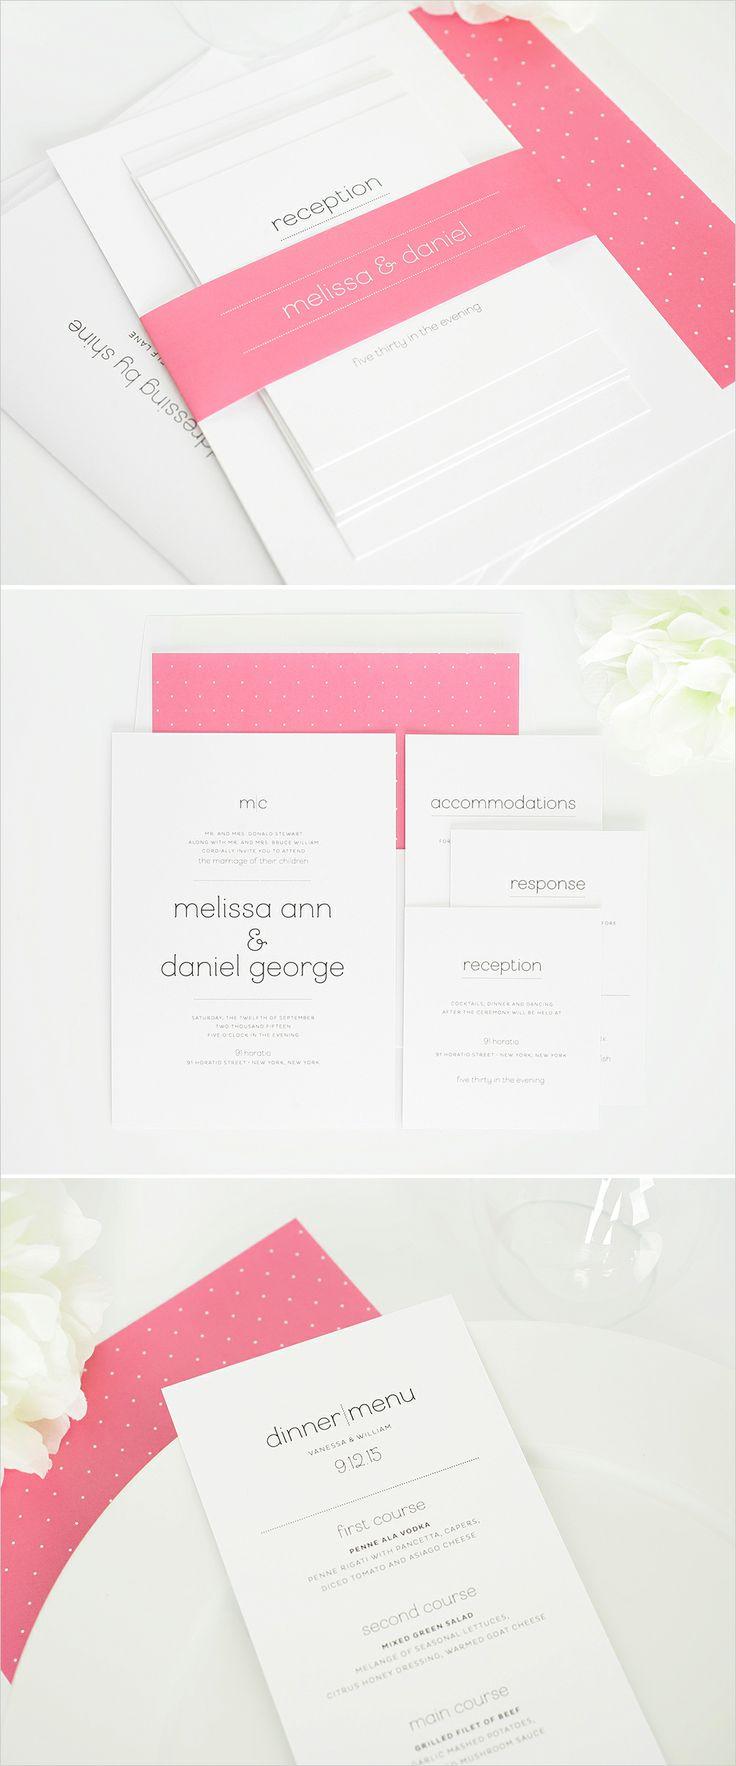 Mariage - Mariages-Invitations-menus-Save The Date .....